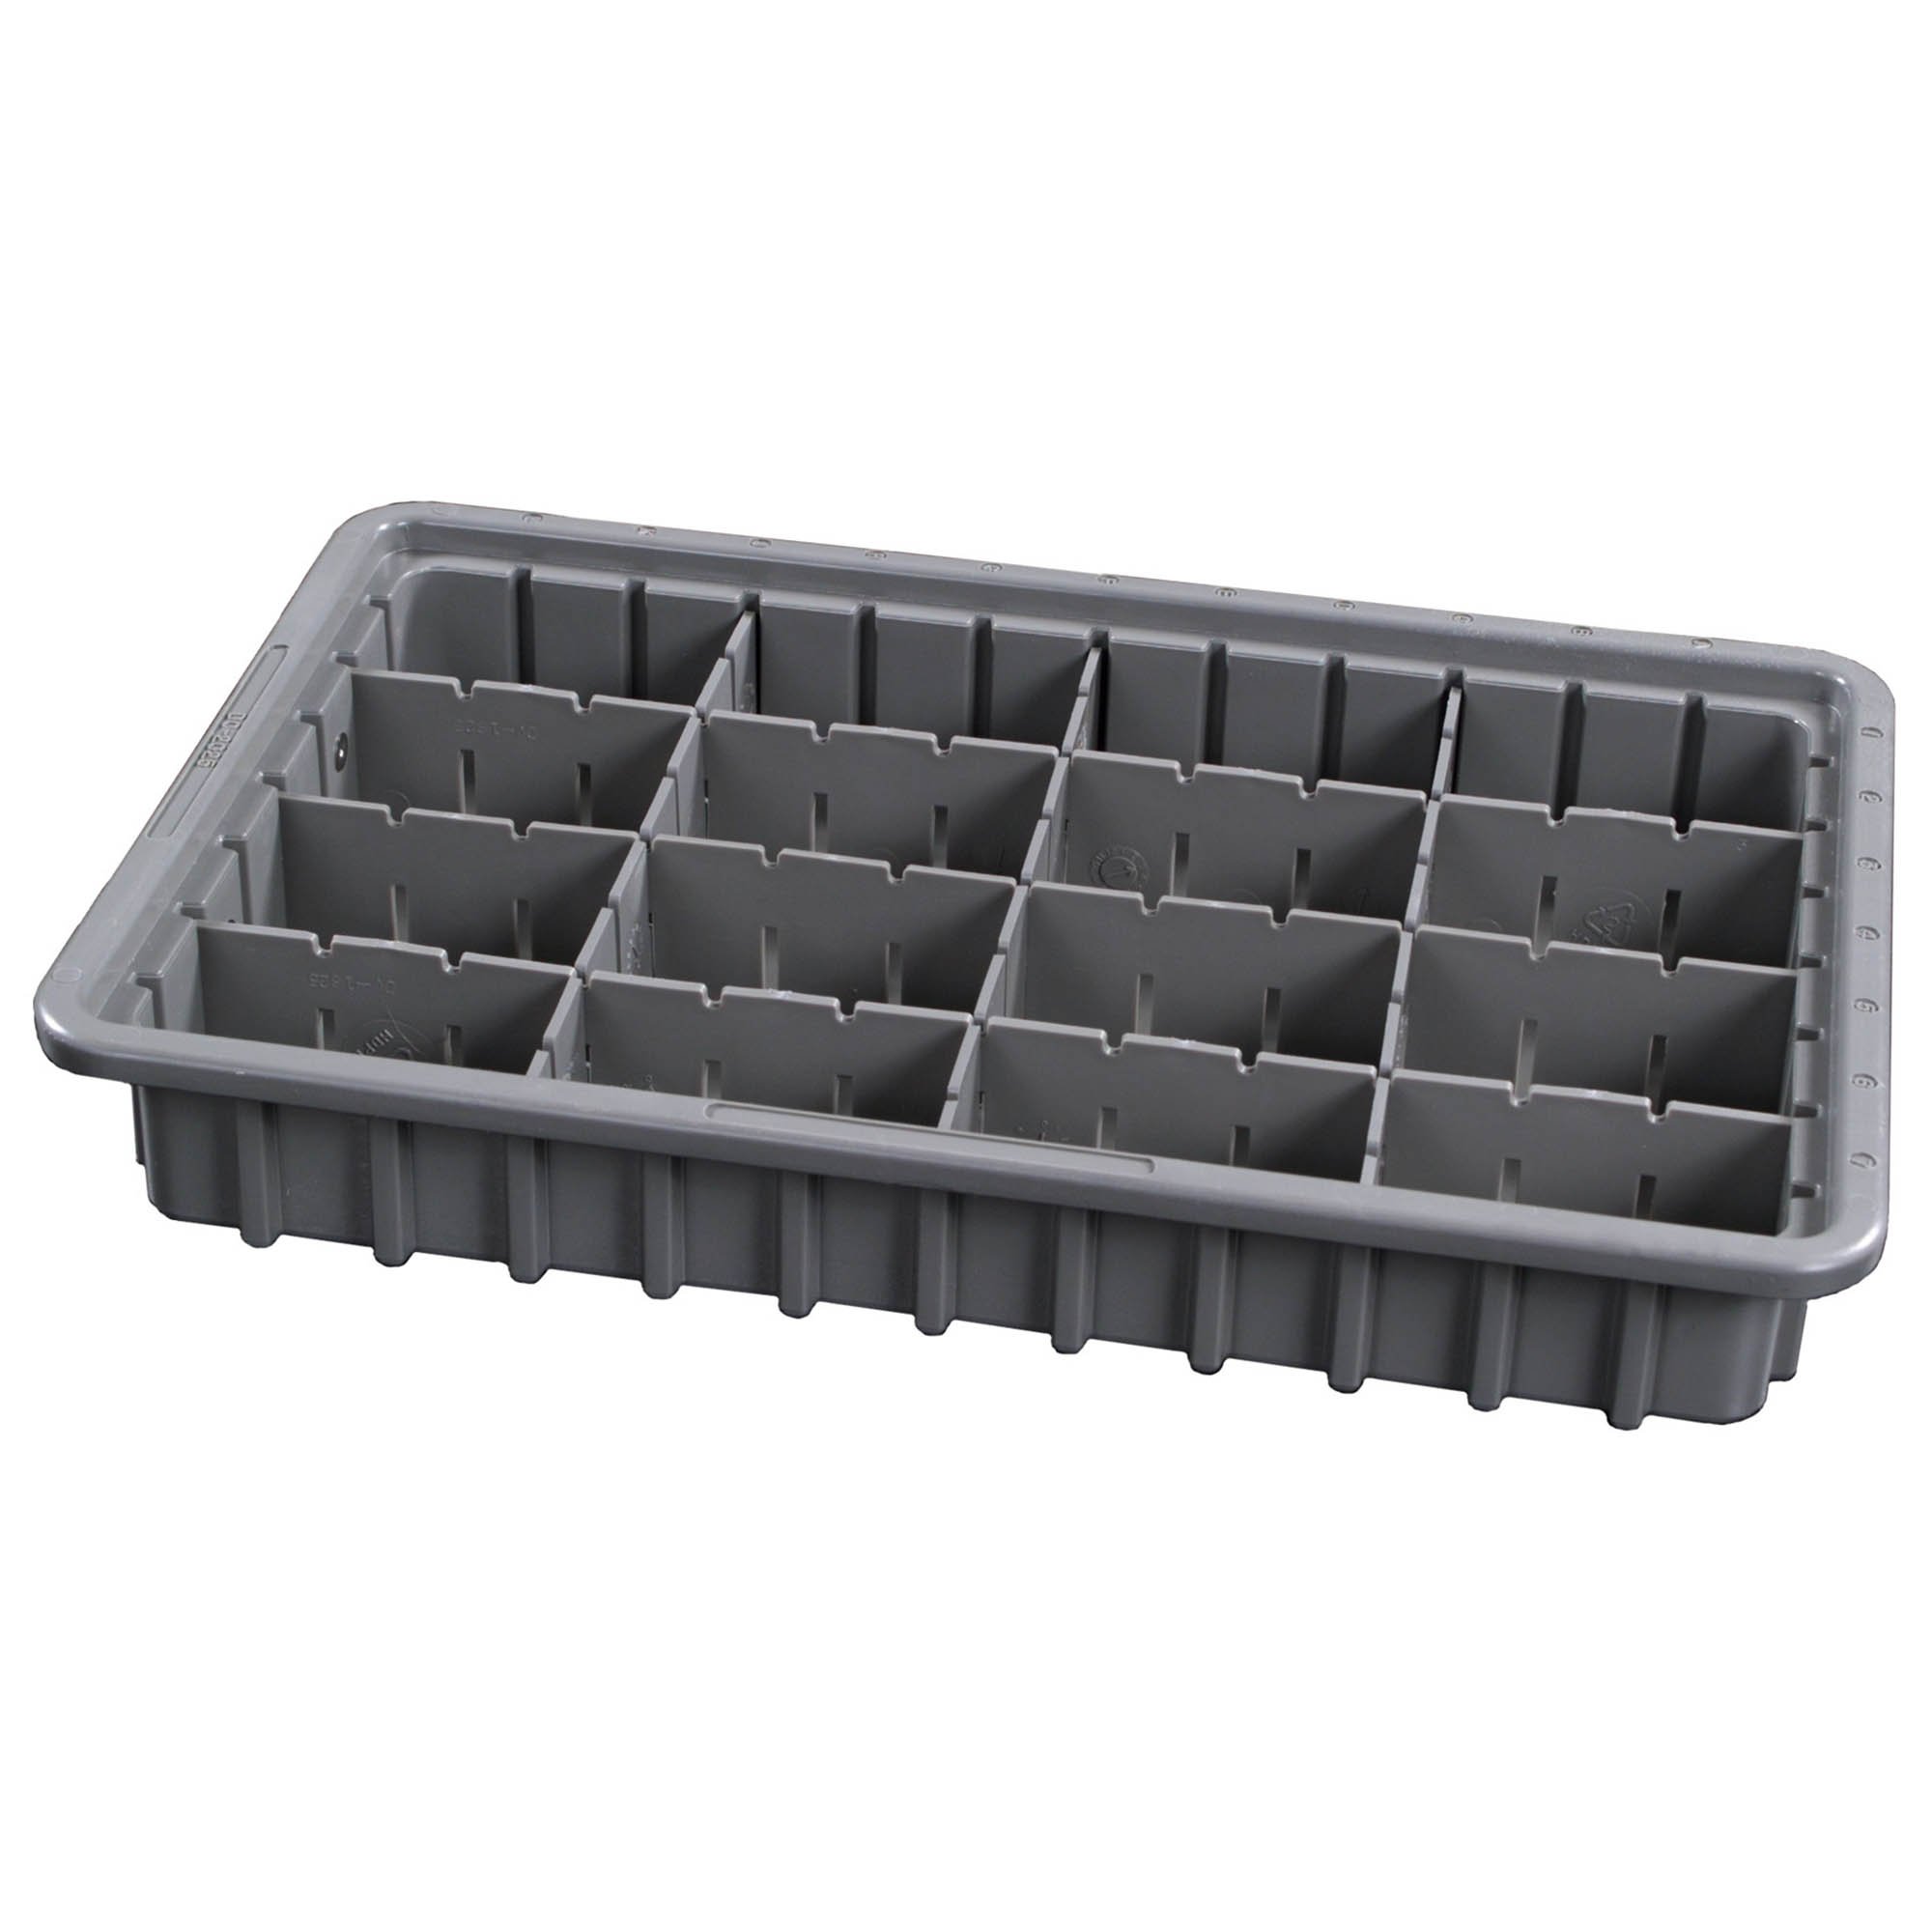 Harloff EXTRAY3 Drawer Exchange Tray with Dividers for 3 High Drawers